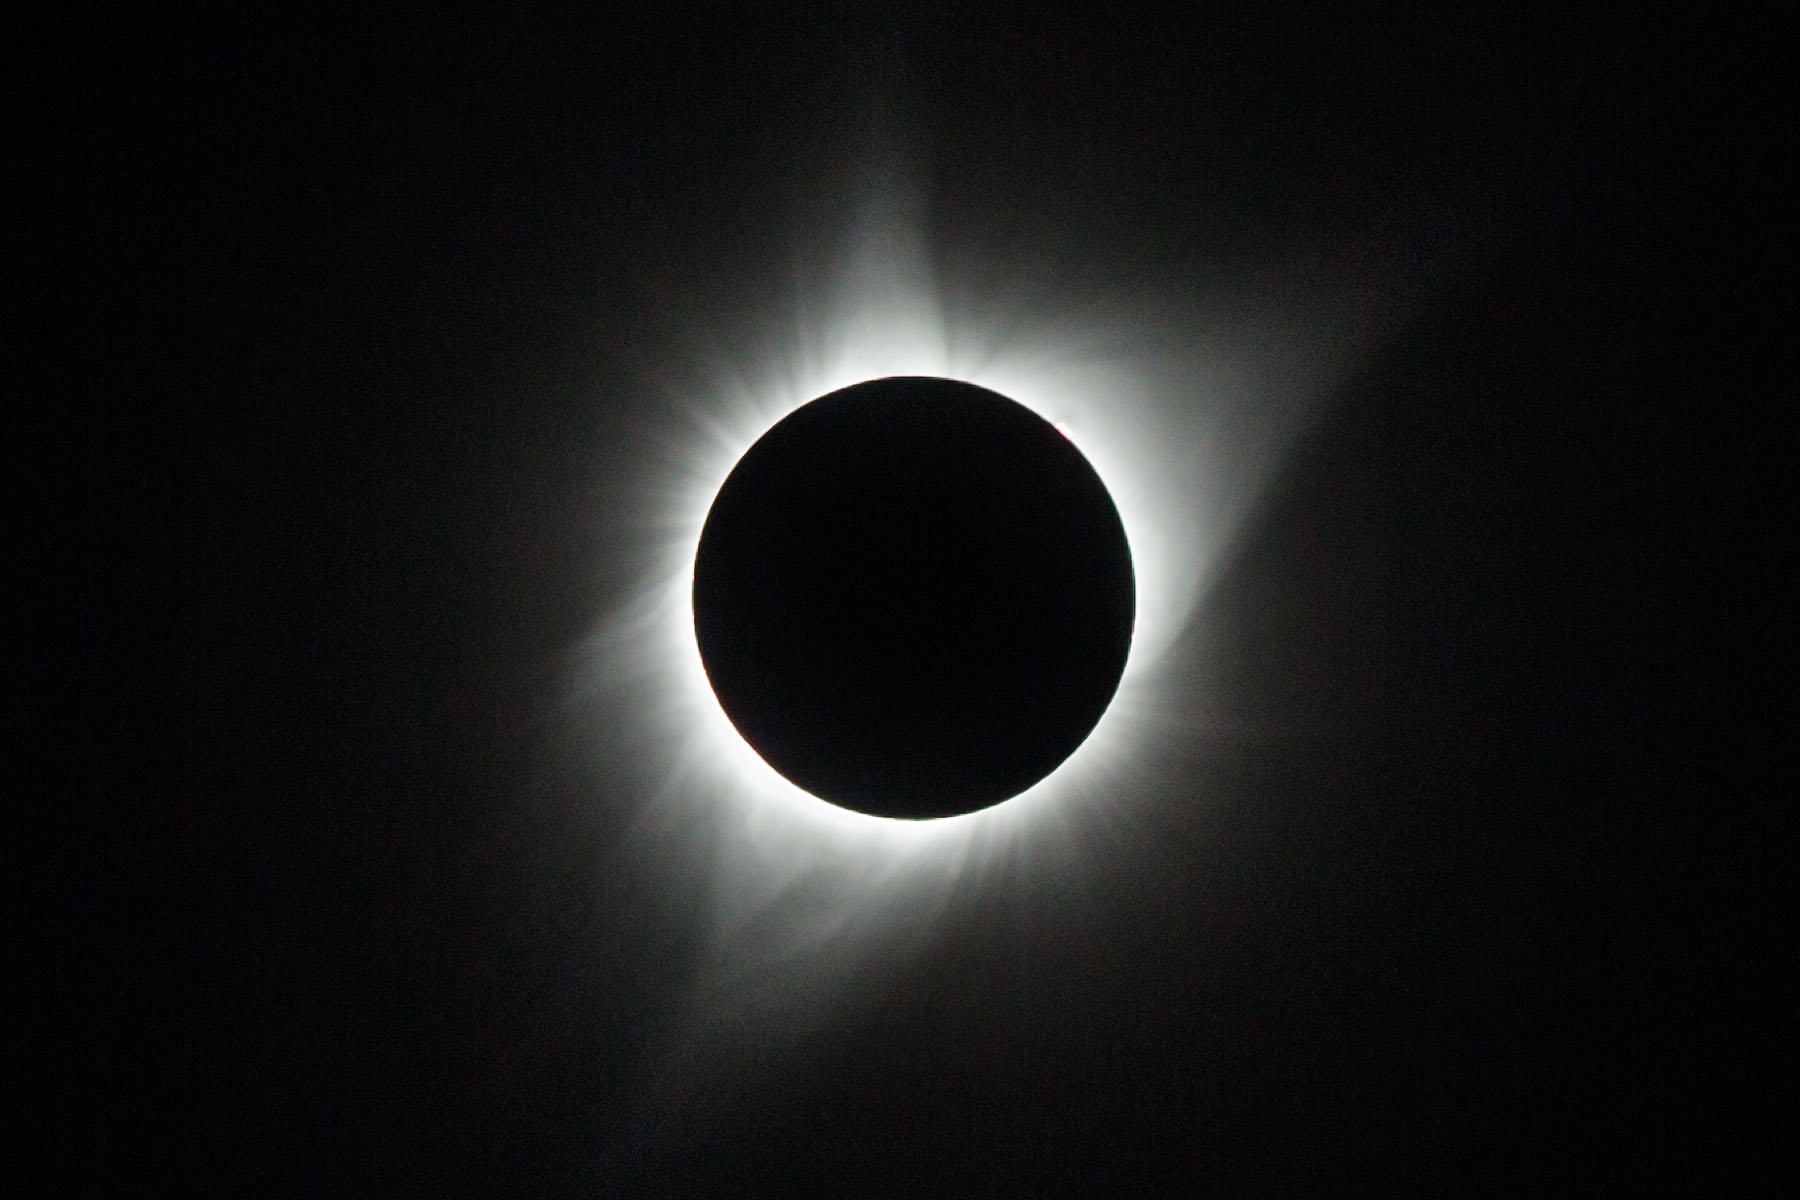 Solar eclipse, Aug. 21, 2017, first image of totality and the corona.  Shutter speed 1/250.  Click for next photo.